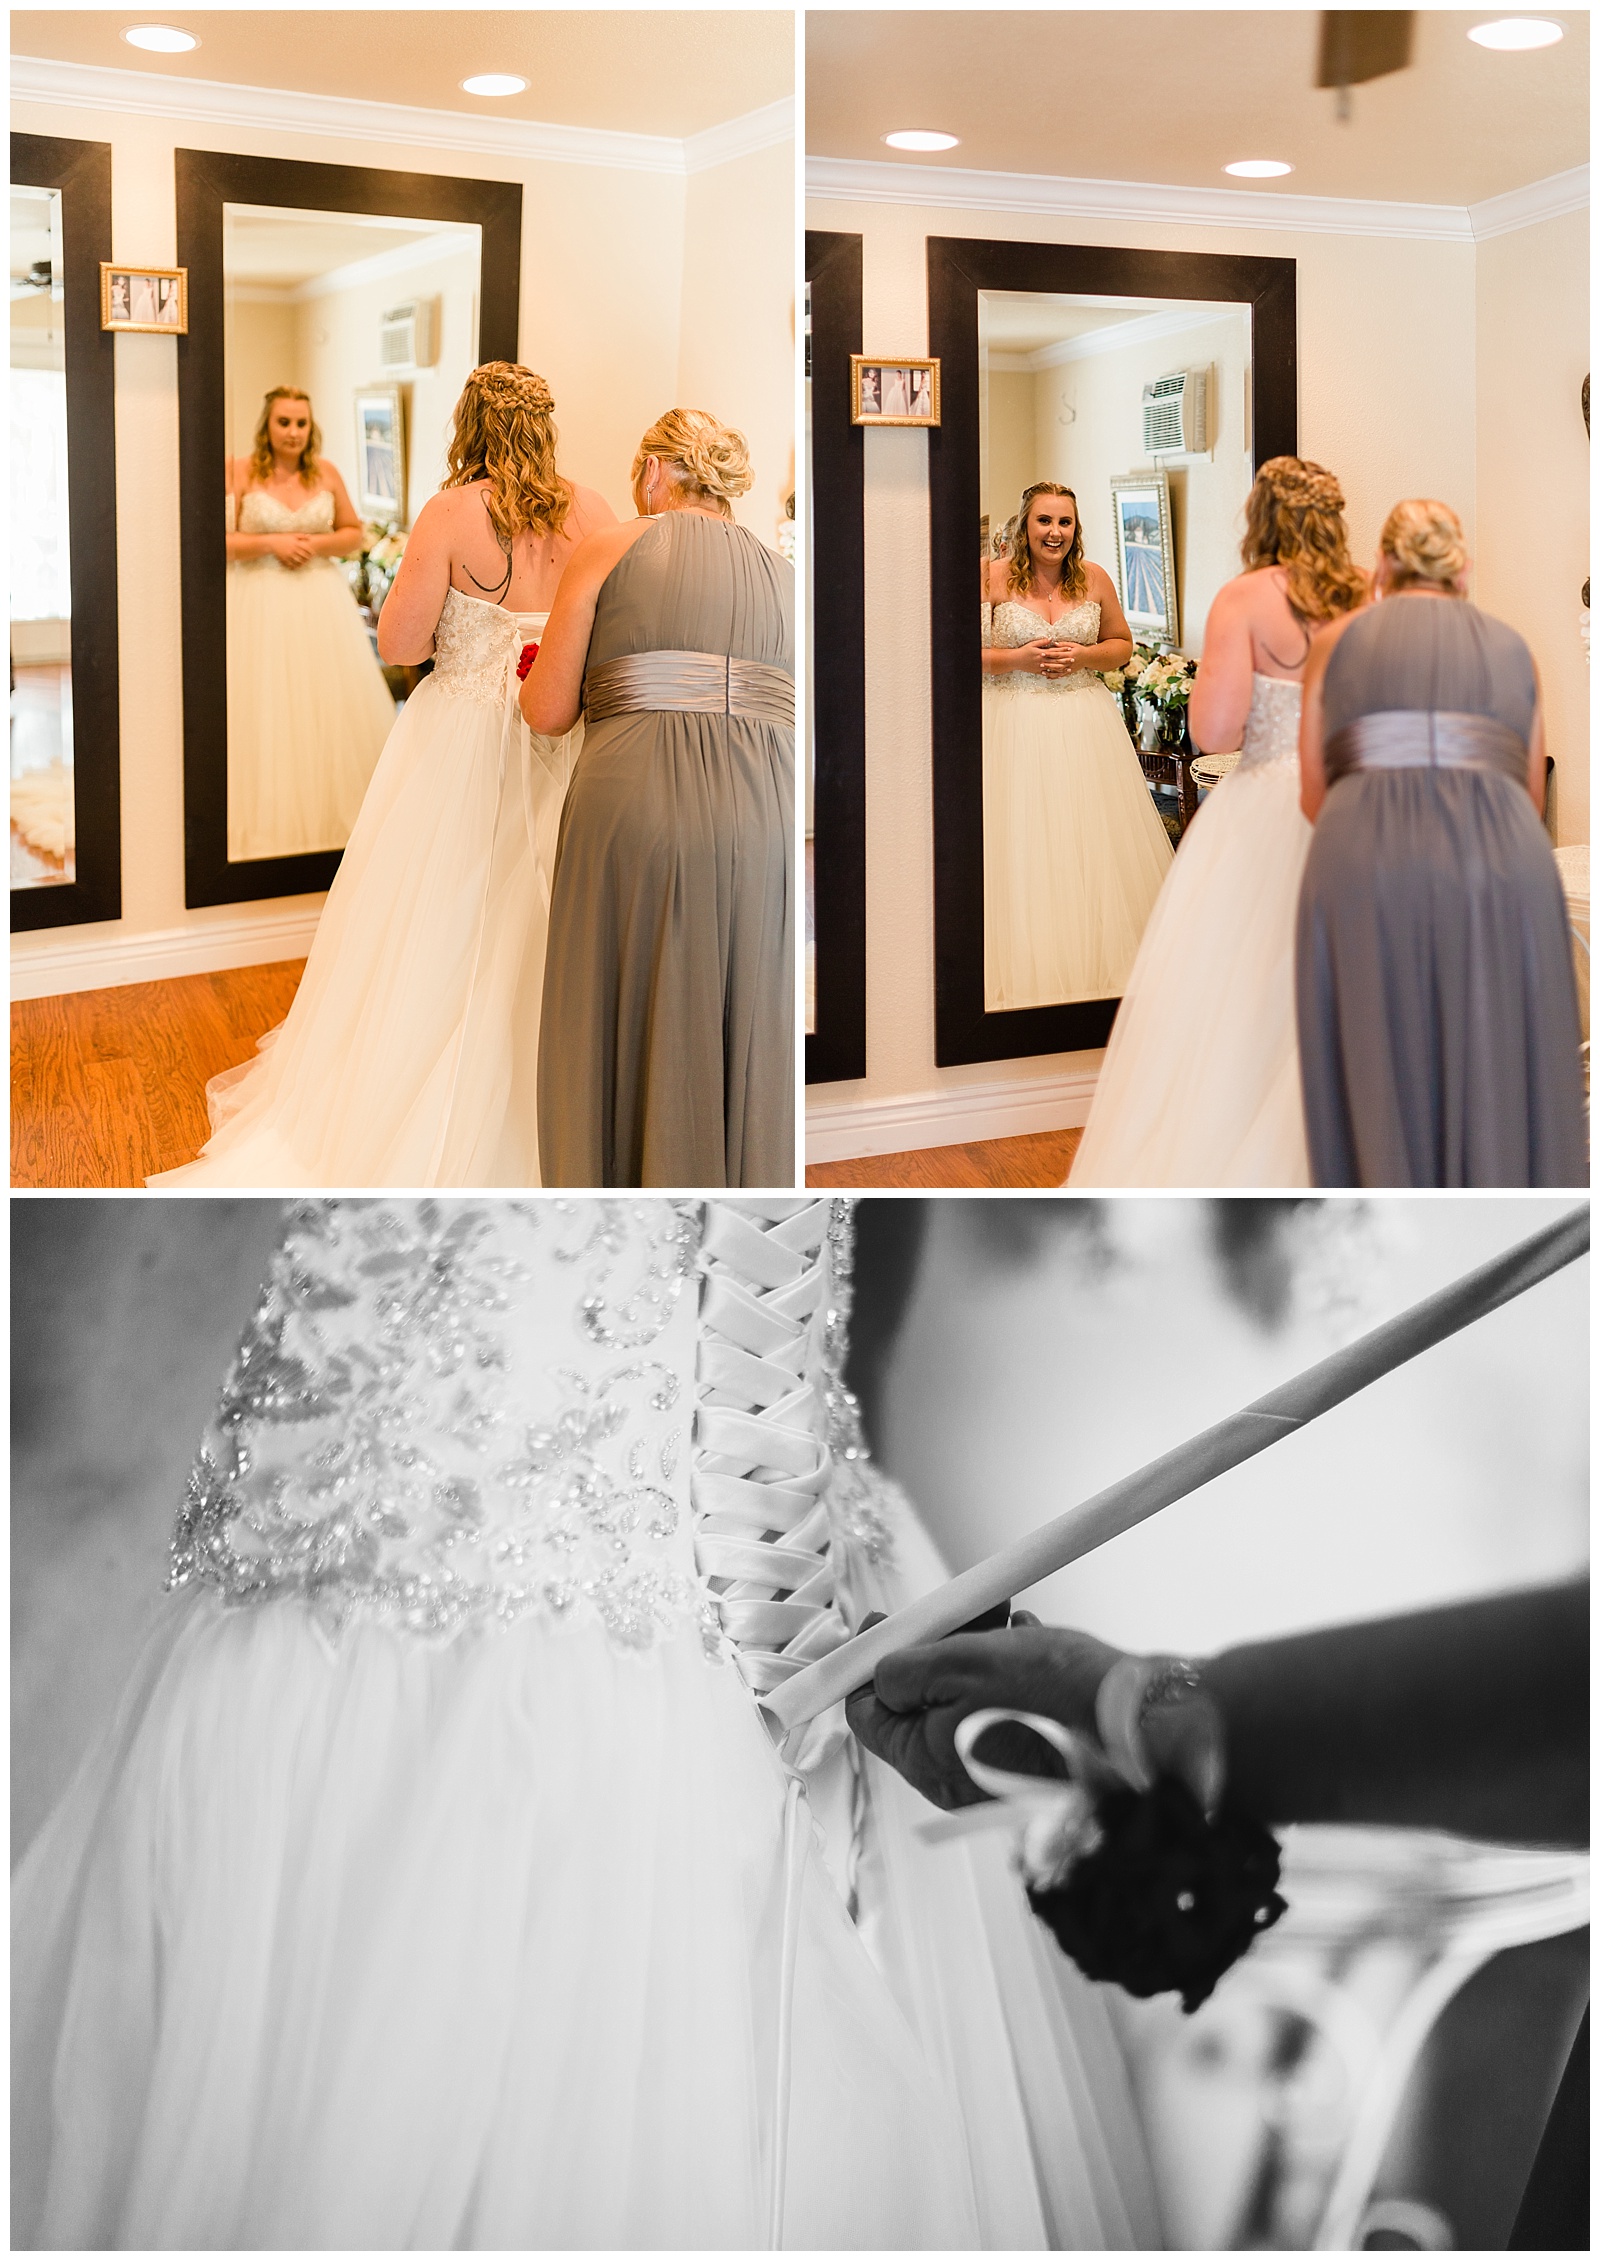 mother of the bride helping the bride into her wedding dress